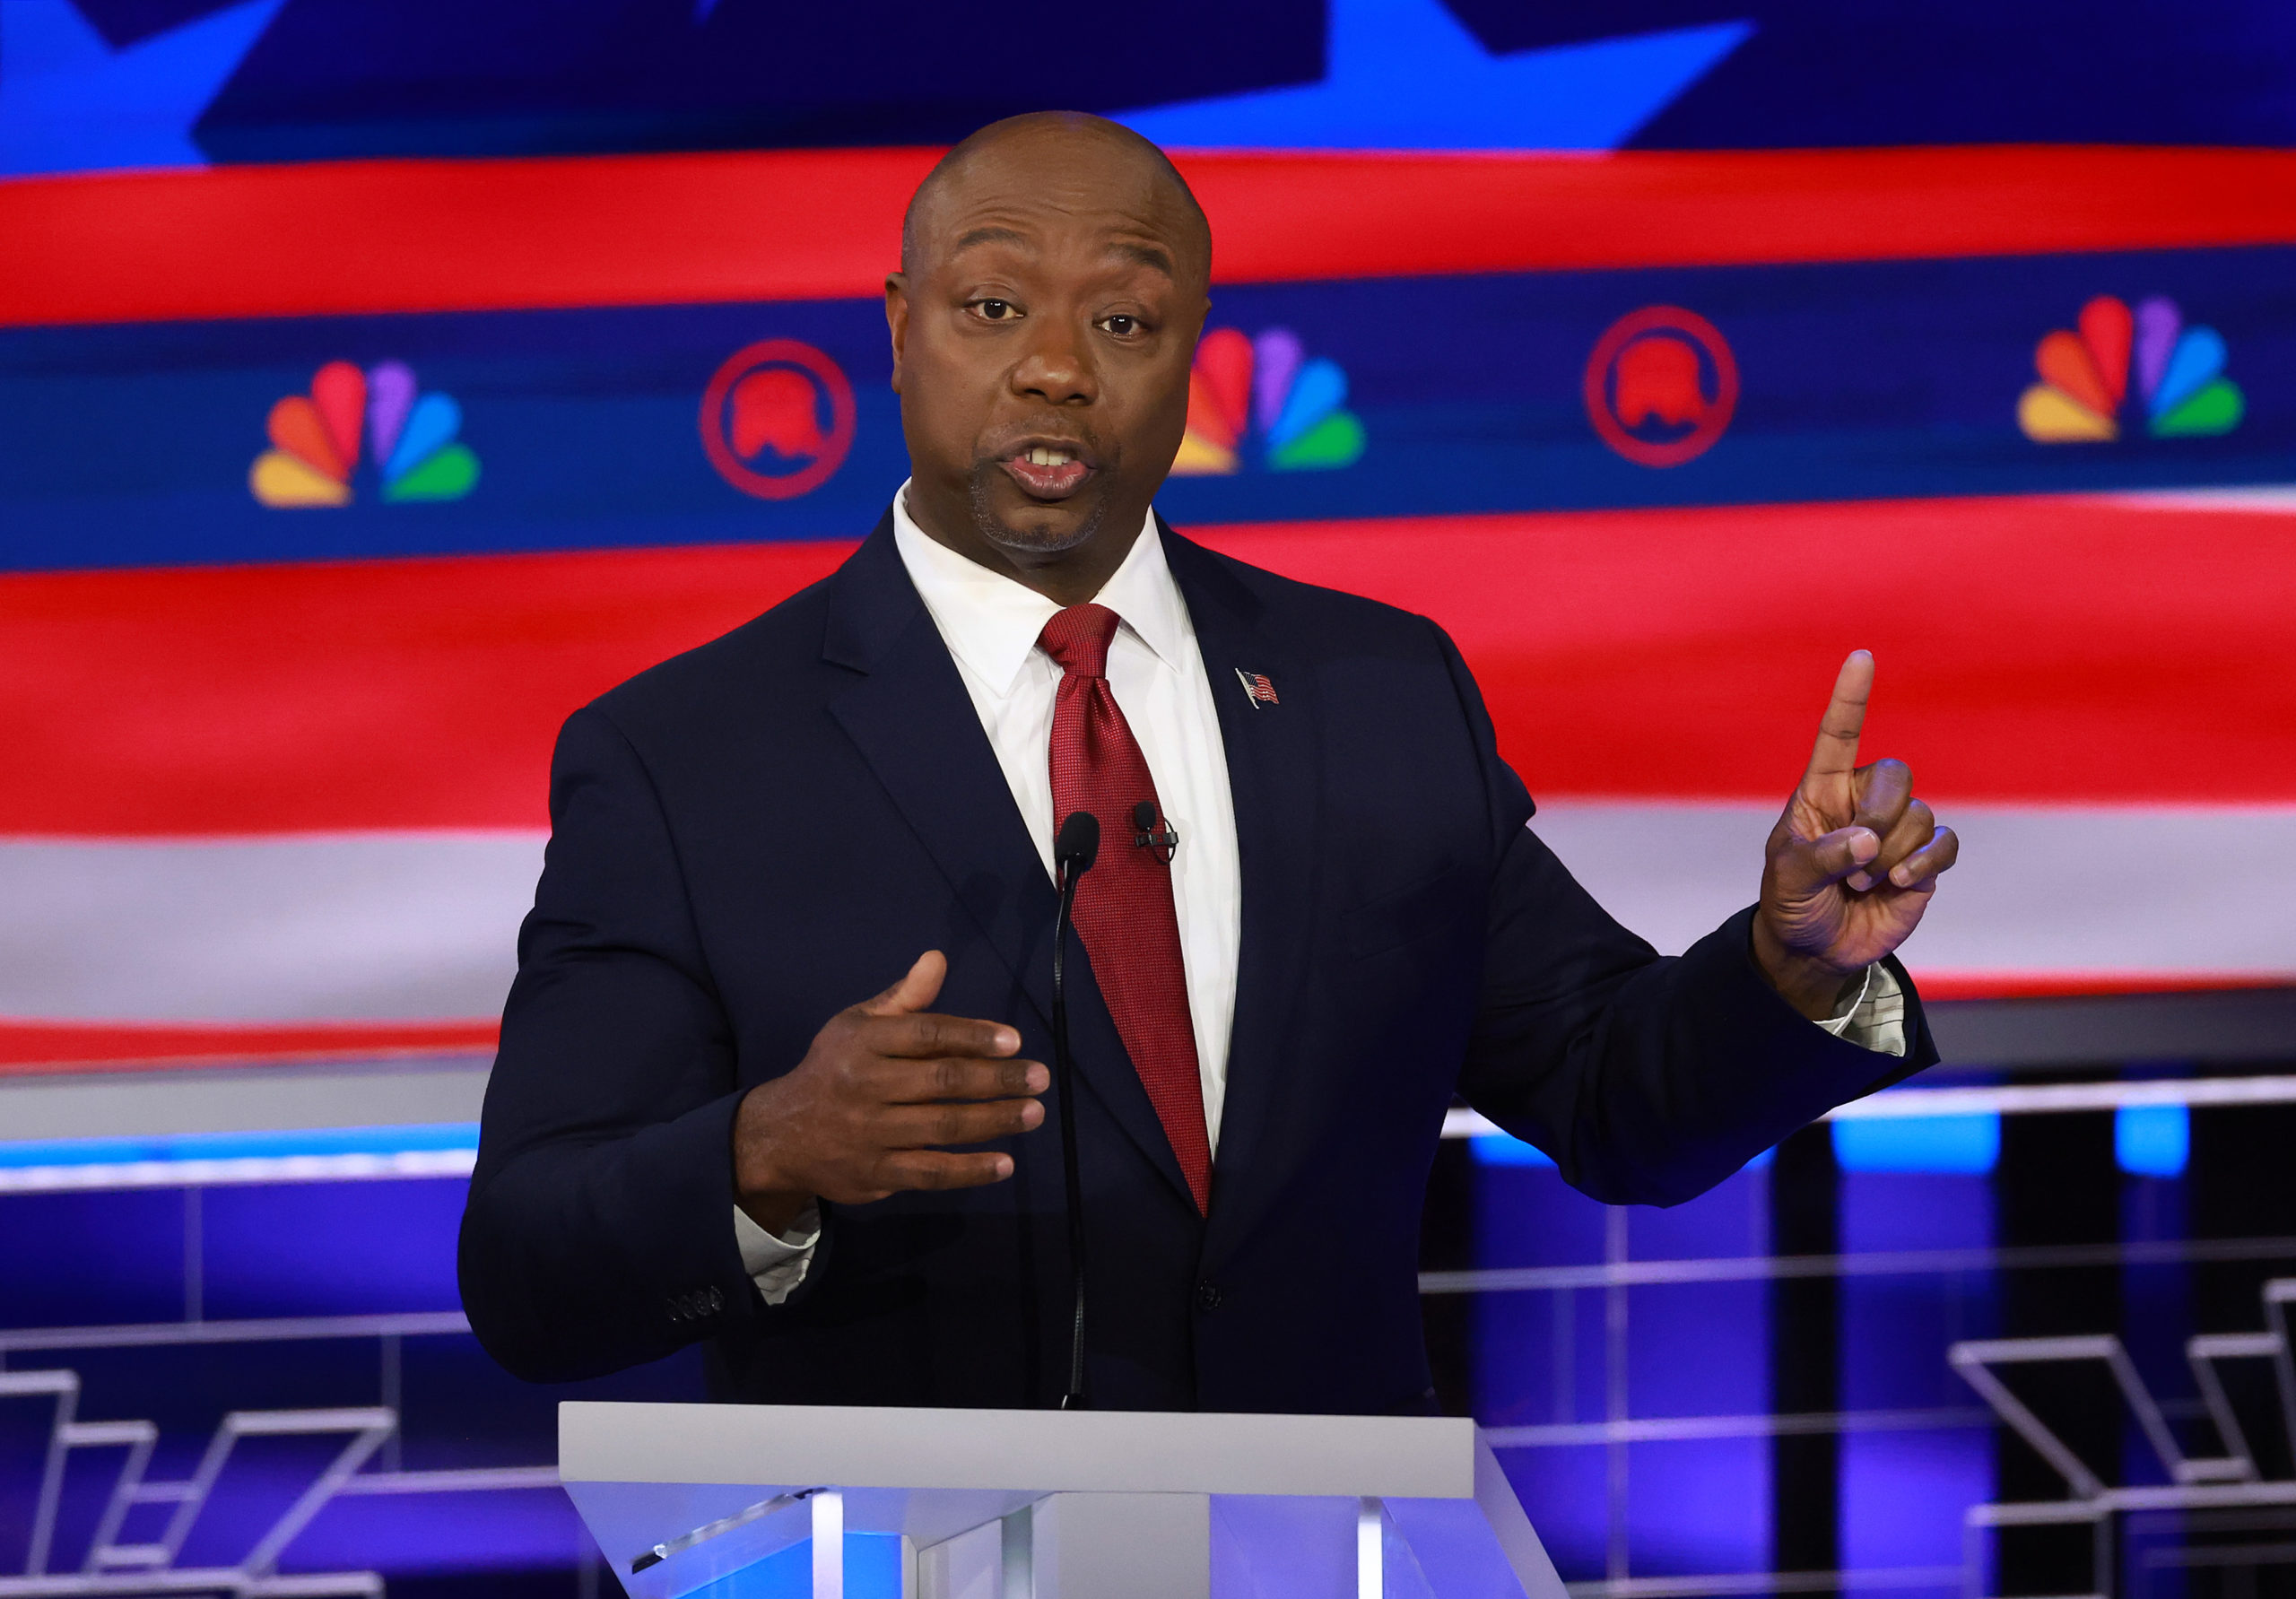 MIAMI, FLORIDA - NOVEMBER 08: Republican presidential candidate U.S. Sen. Tim Scott (R-SC) speaks during the NBC News Republican Presidential Primary Debate at the Adrienne Arsht Center for the Performing Arts of Miami-Dade County on November 8, 2023 in Miami, Florida. Five presidential hopefuls squared off in the third Republican primary debate as former U.S. President Donald Trump, currently facing indictments in four locations, declined again to participate. (Photo by Joe Raedle/Getty Images)